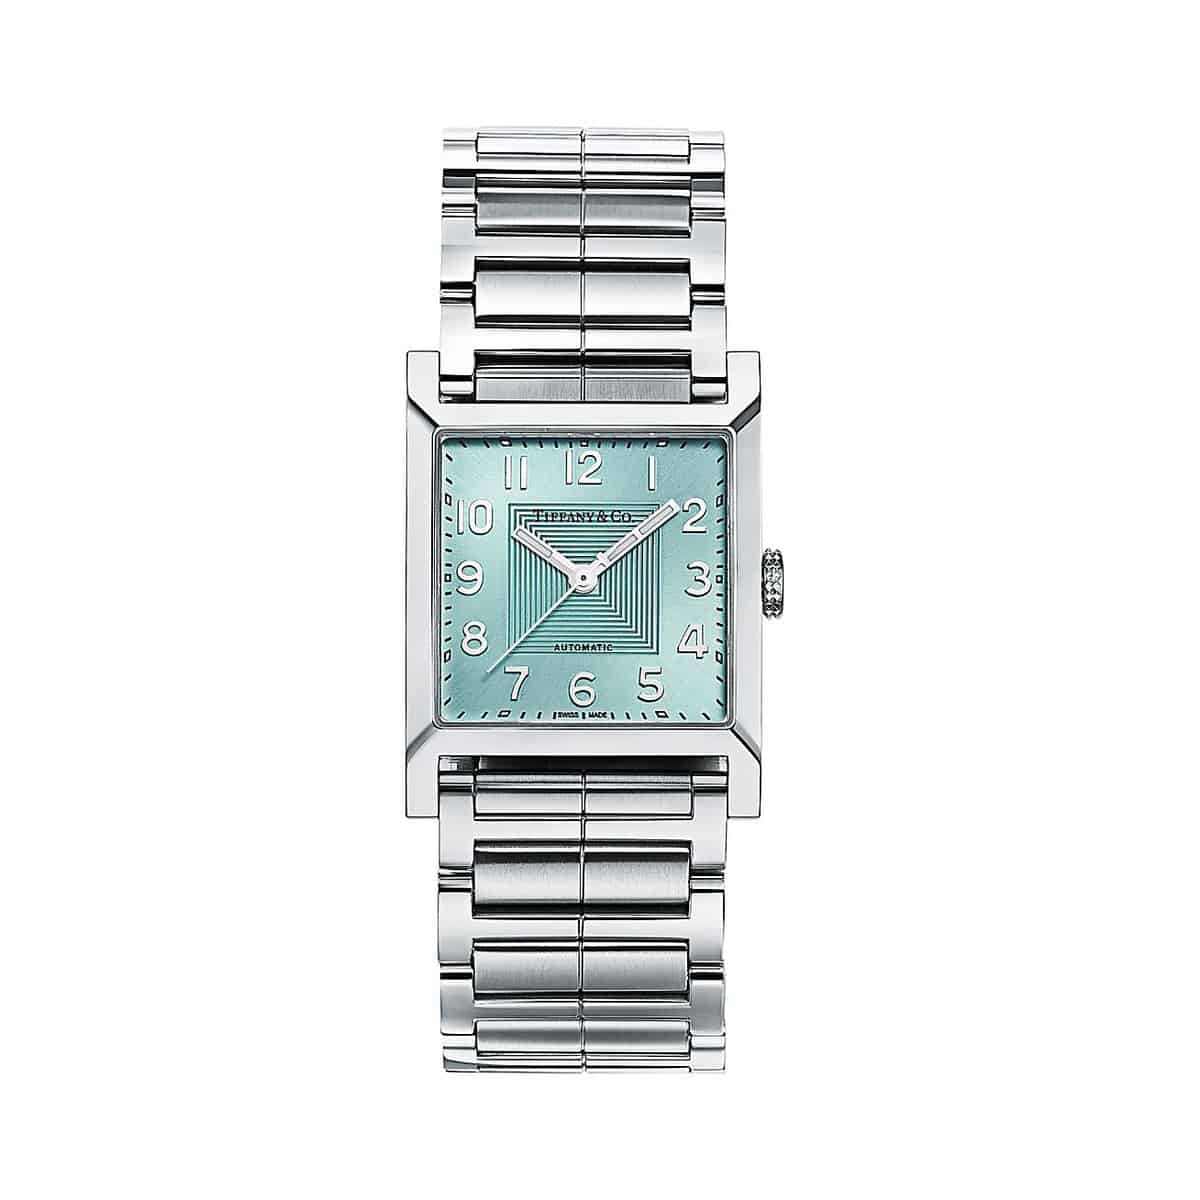 Tiffany 1837 Makers square watch